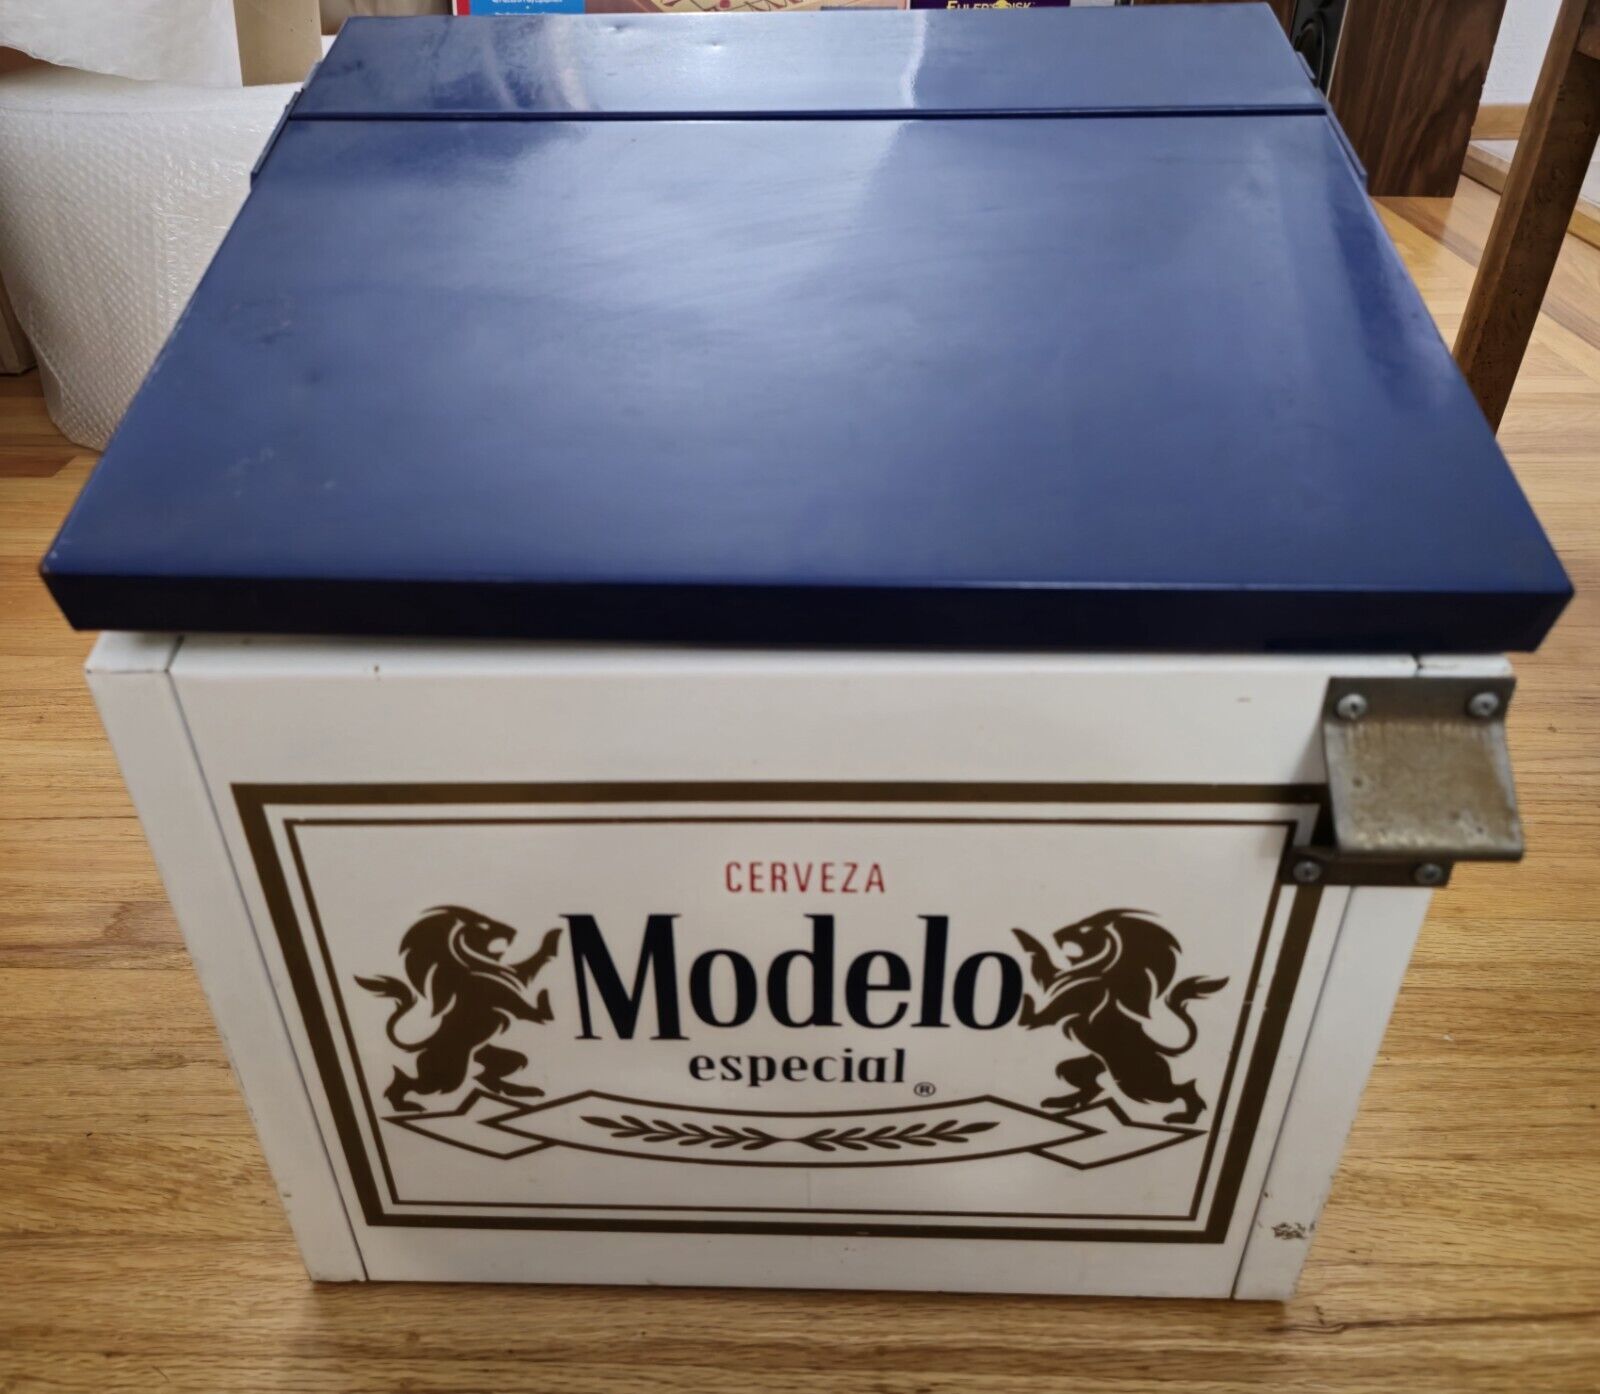 RARE Beer Cooler Modelo especial Cerveza Clean Great Shape Vtg Made in Mexico